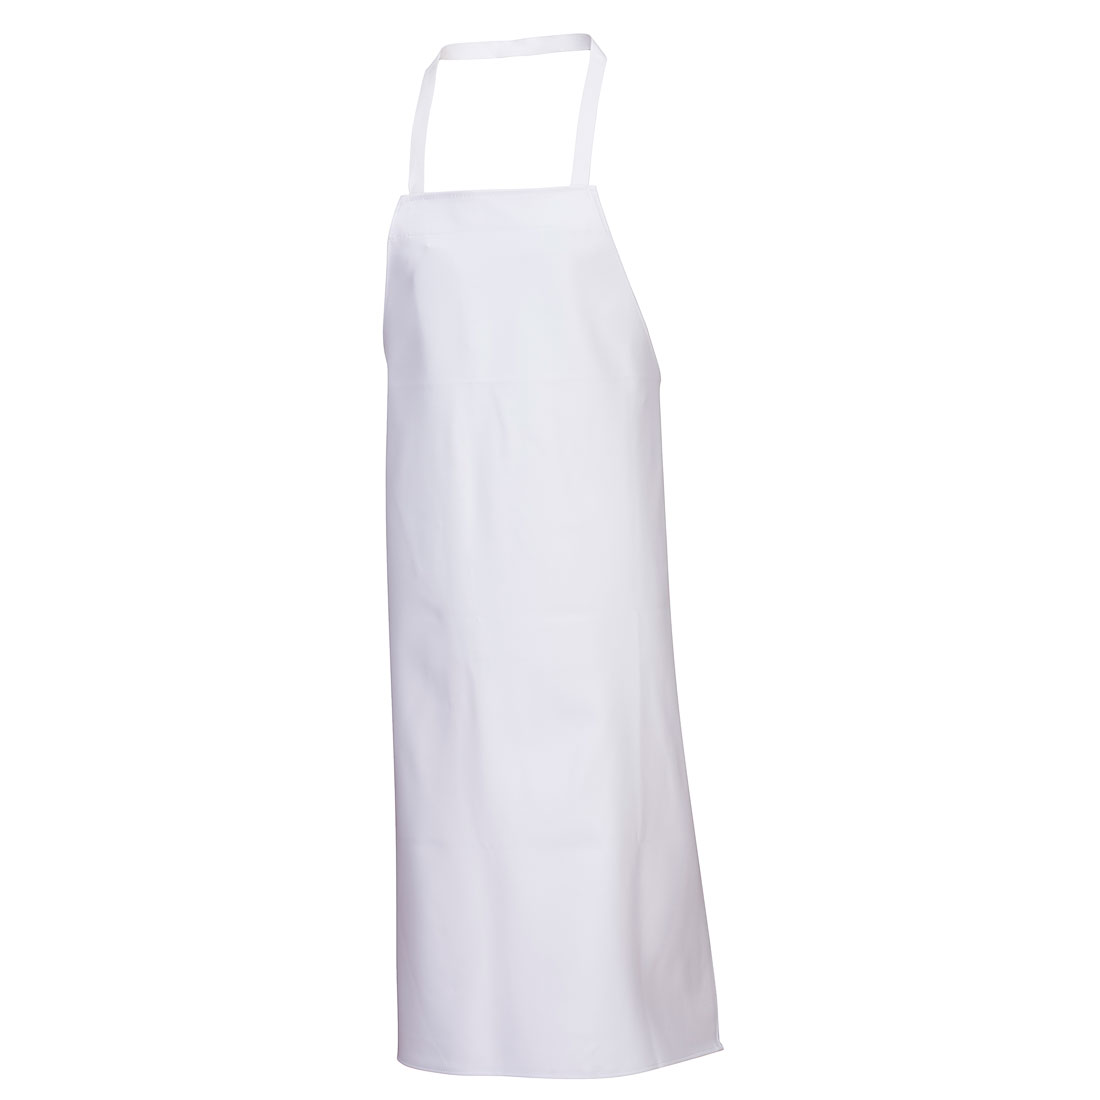 Food Industry Apron Size  White